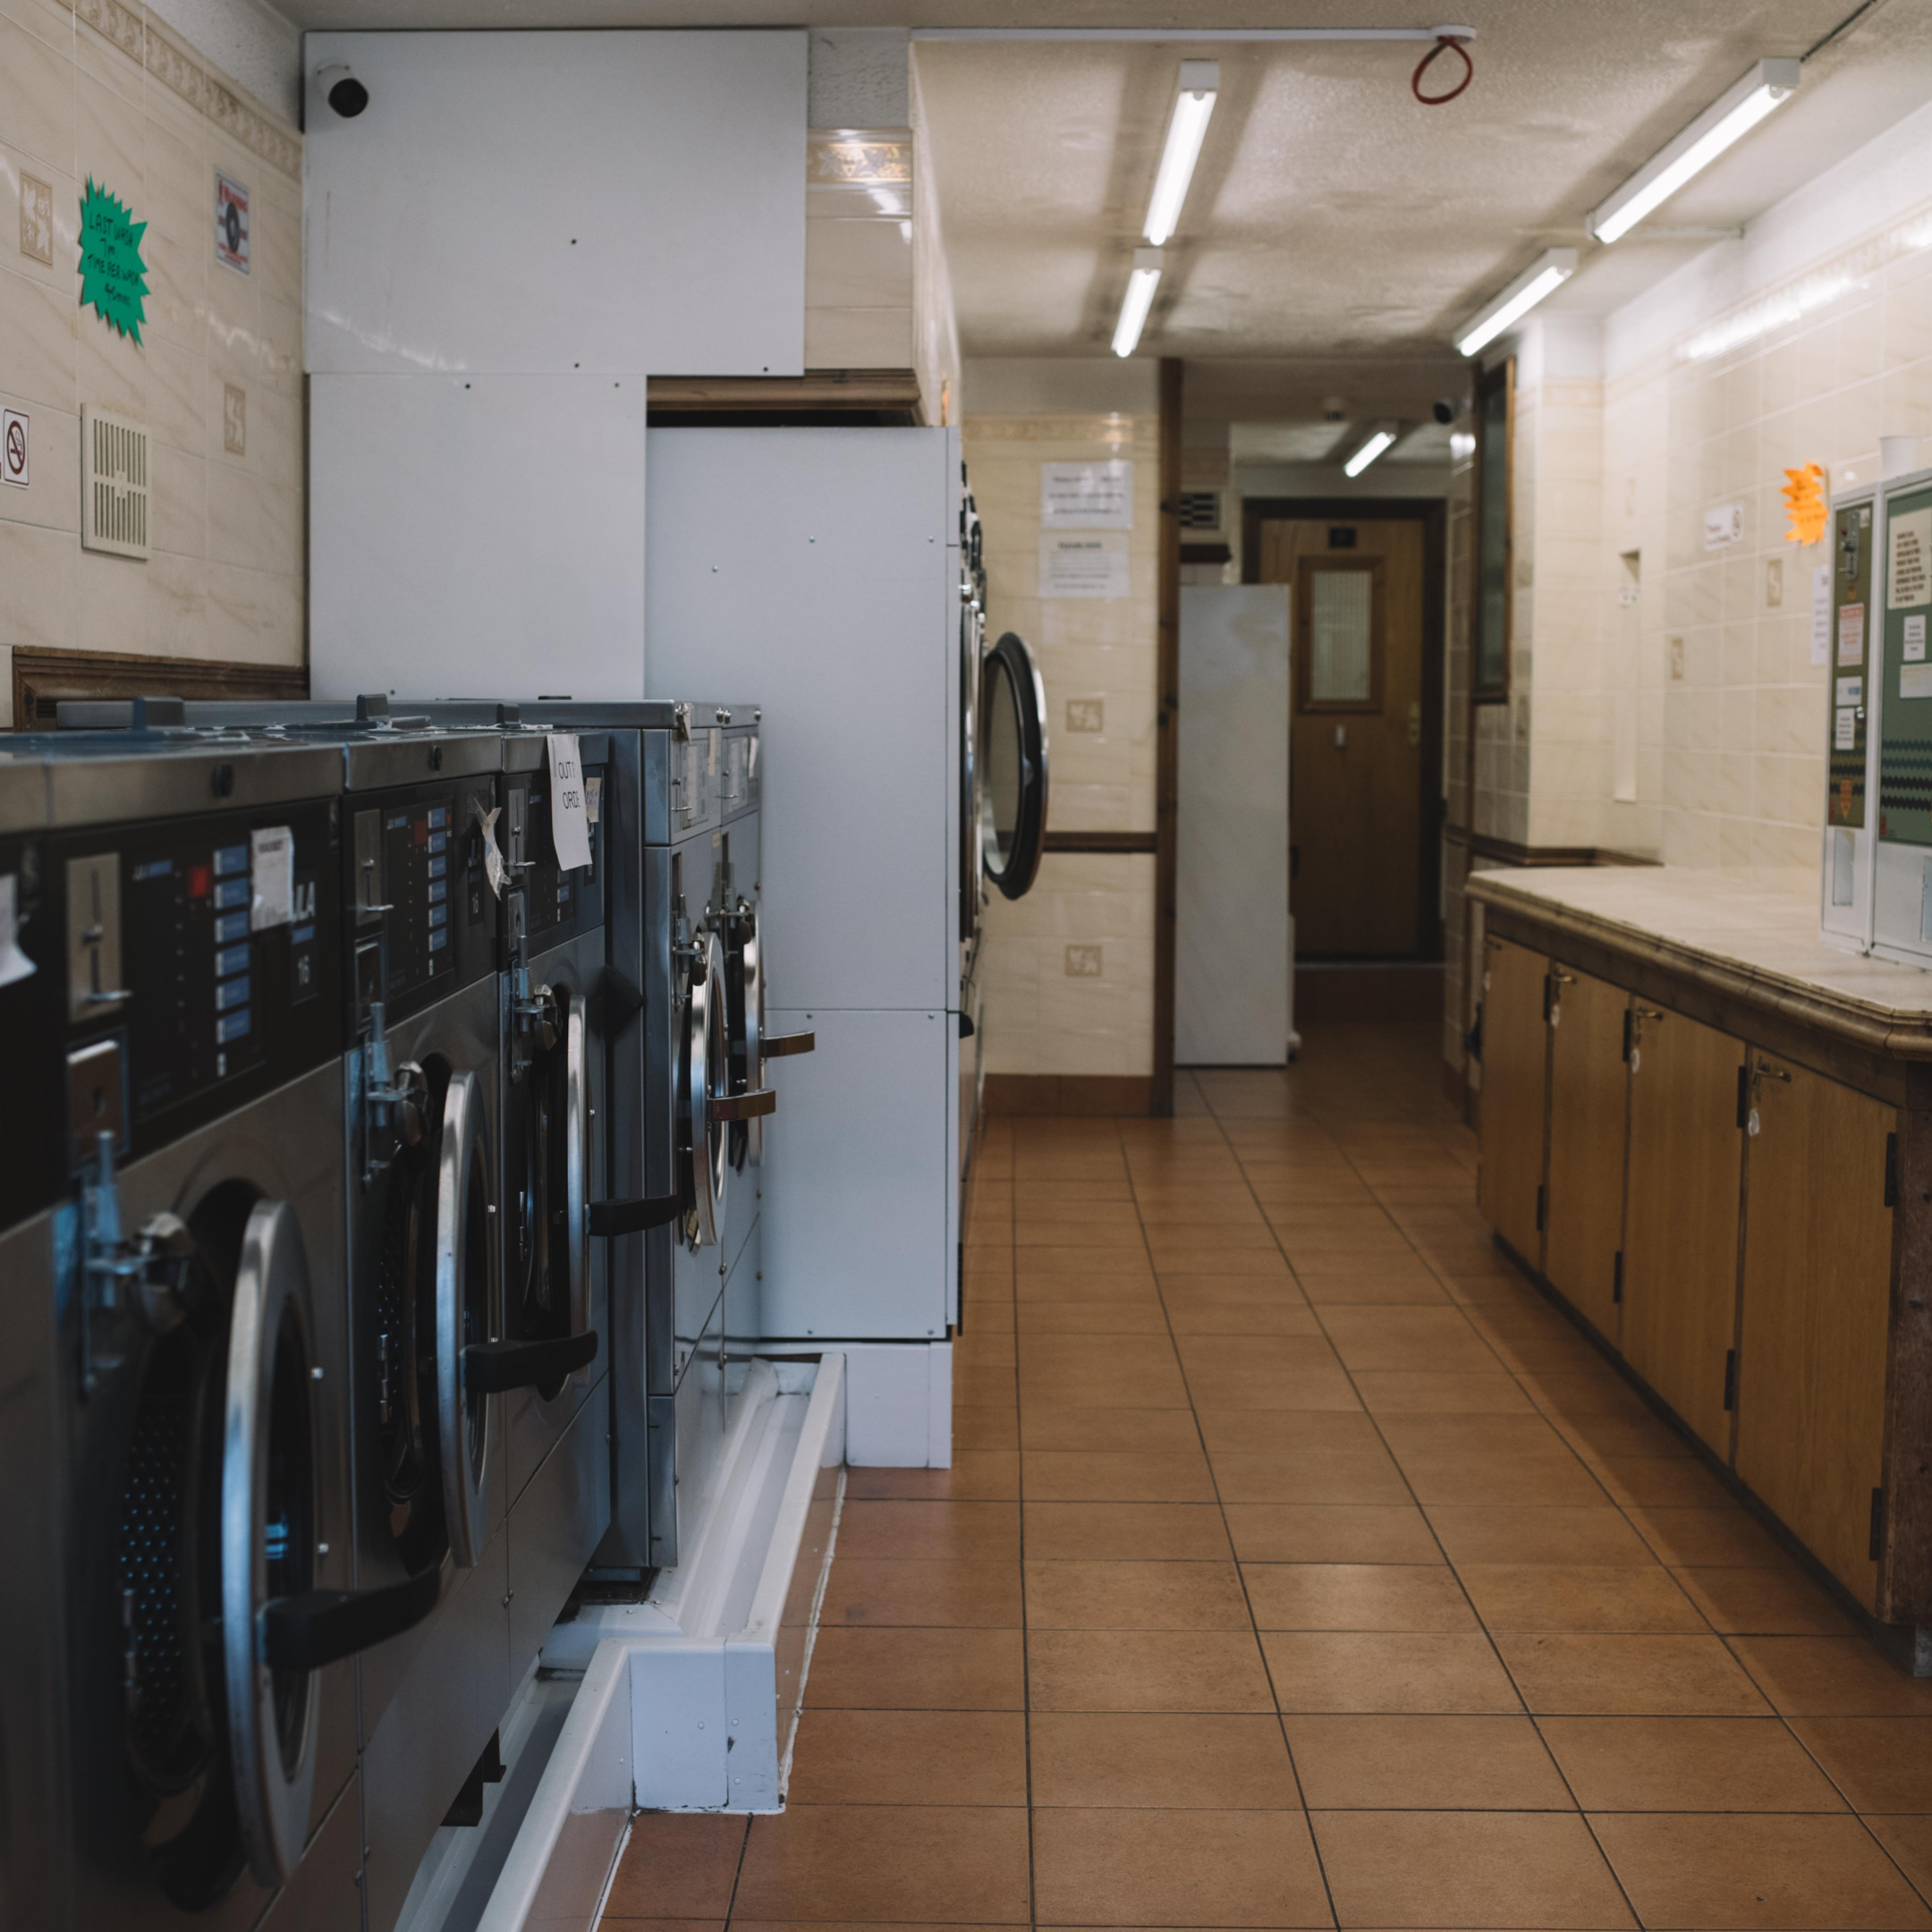 An on-site laundry room provided for the building's apartment community 